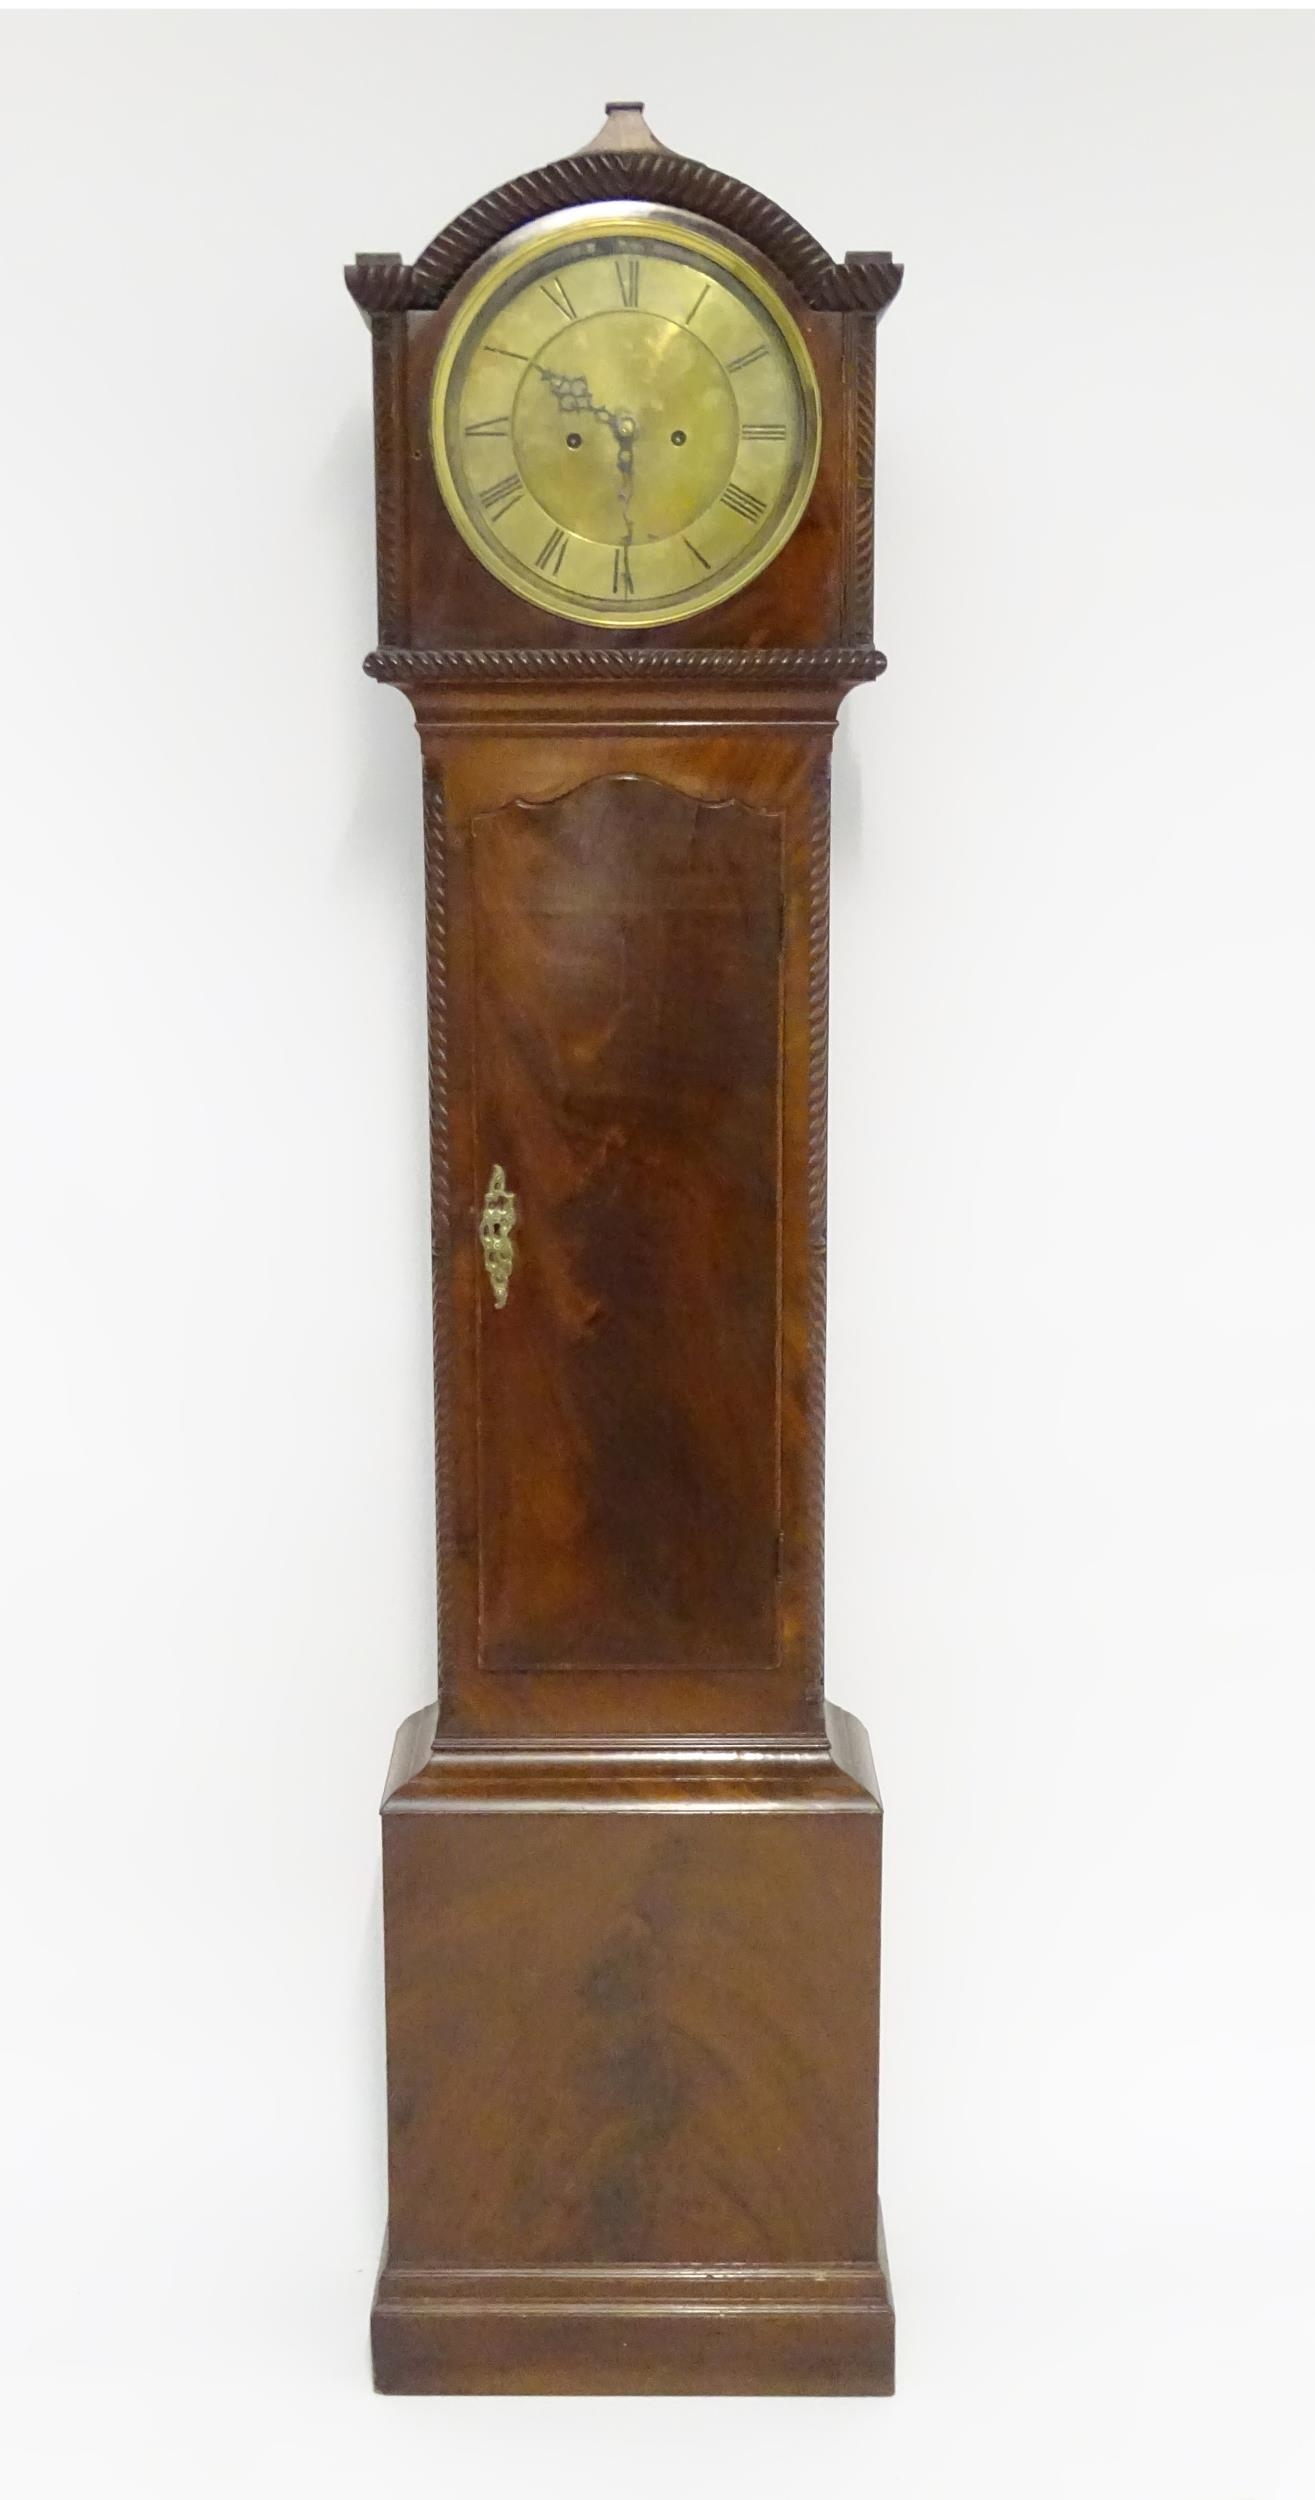 A 19thC mahogany longcase clock, the 8-day movement with circular silvered brass dial. Approx. 79"